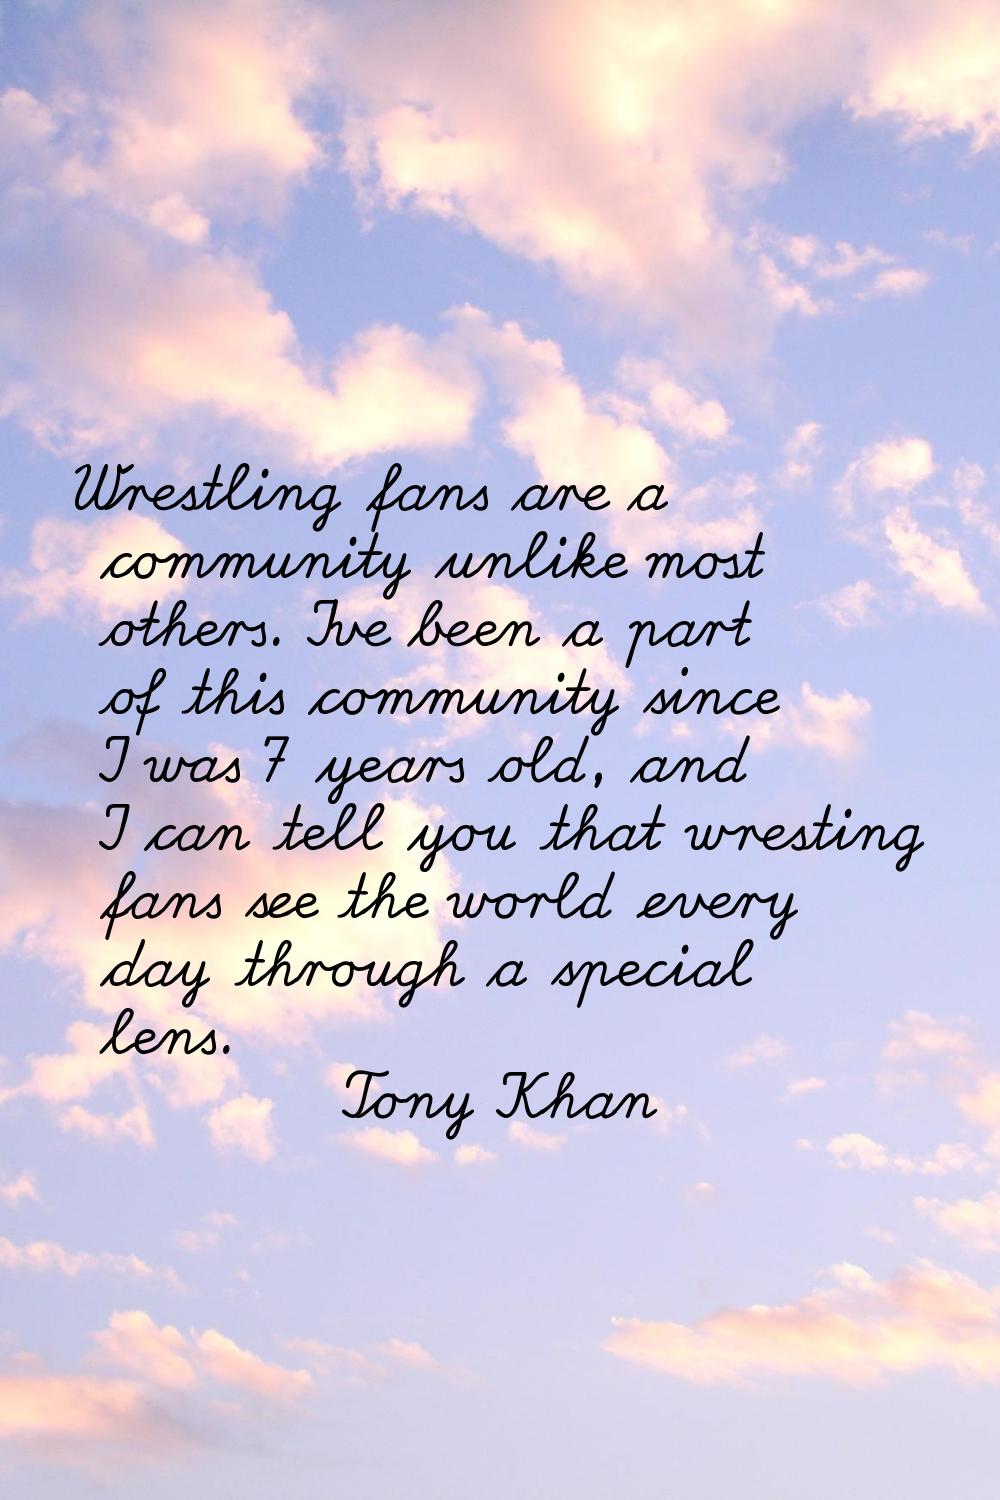 Wrestling fans are a community unlike most others. I've been a part of this community since I was 7